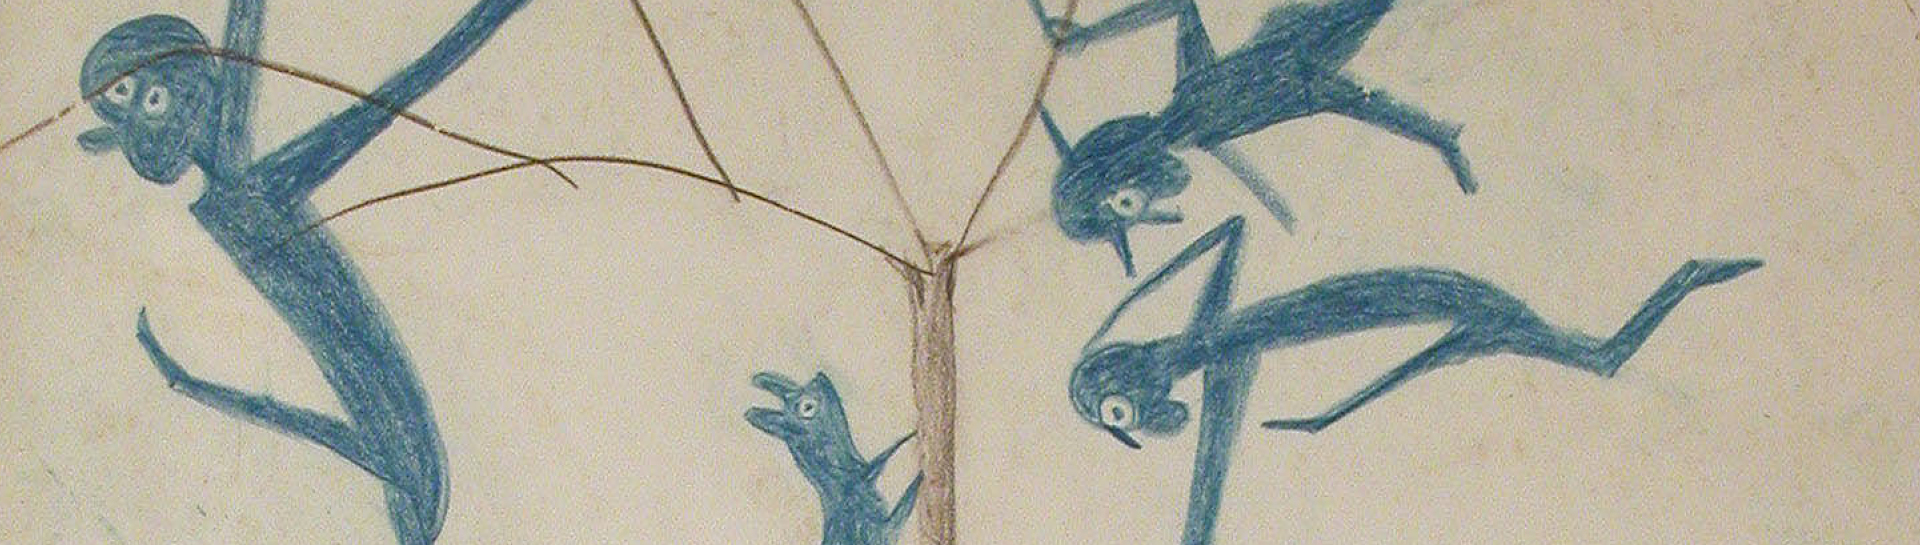 Detail of work by Bill Traylor